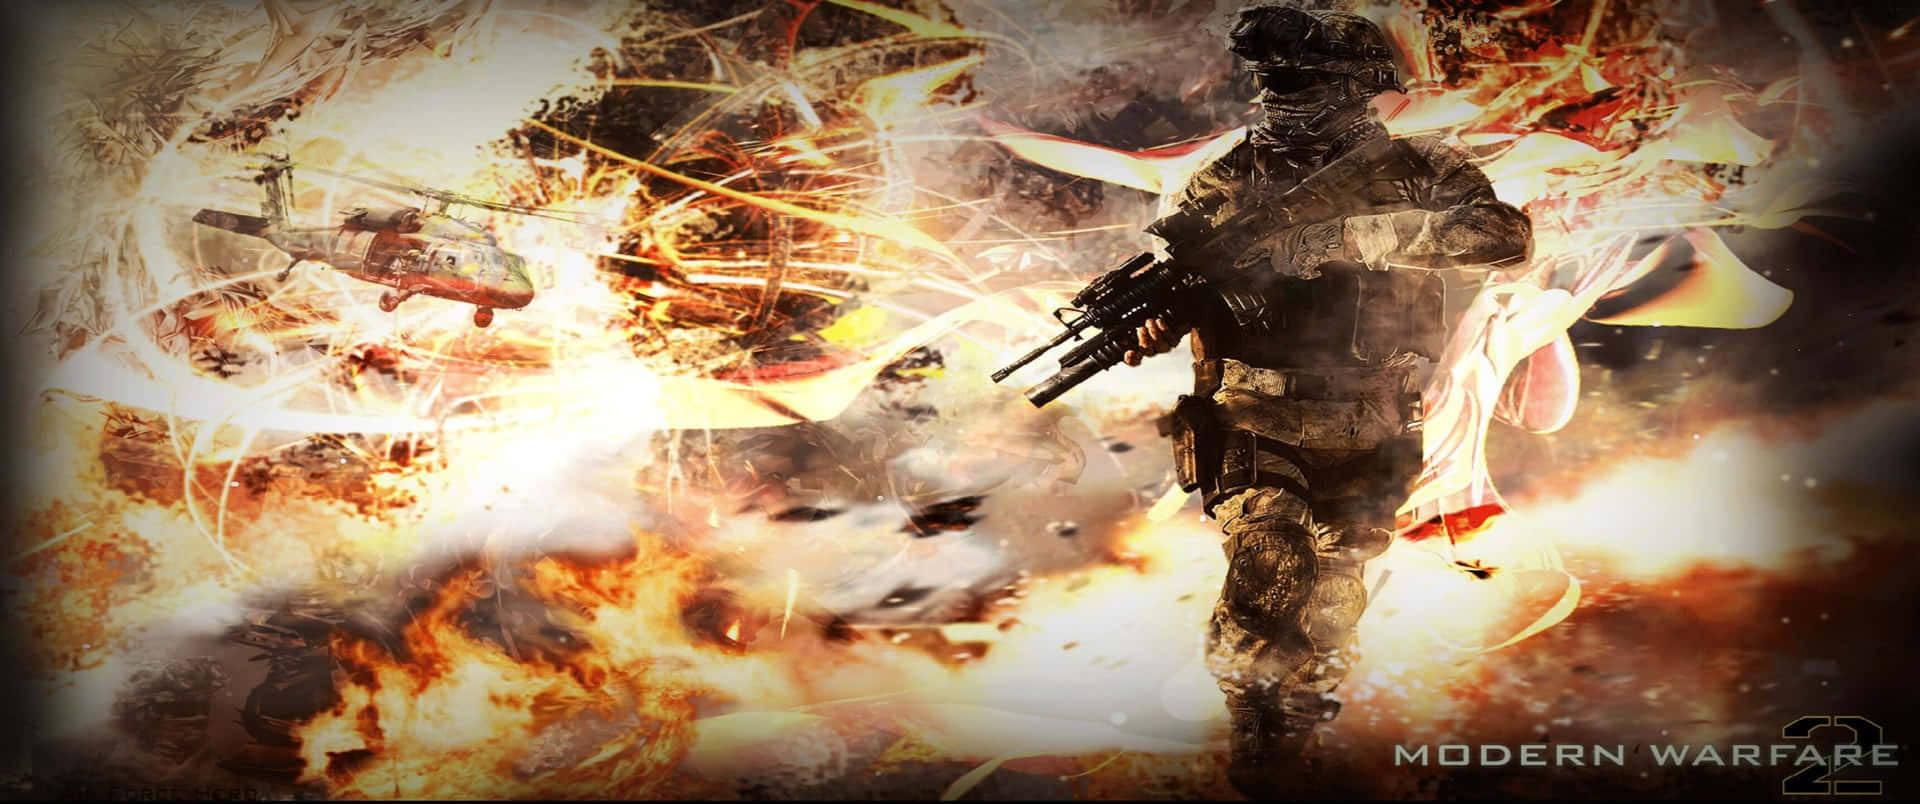 Large Explosion 3440x1440p Call Of Duty Modern Warfare Background